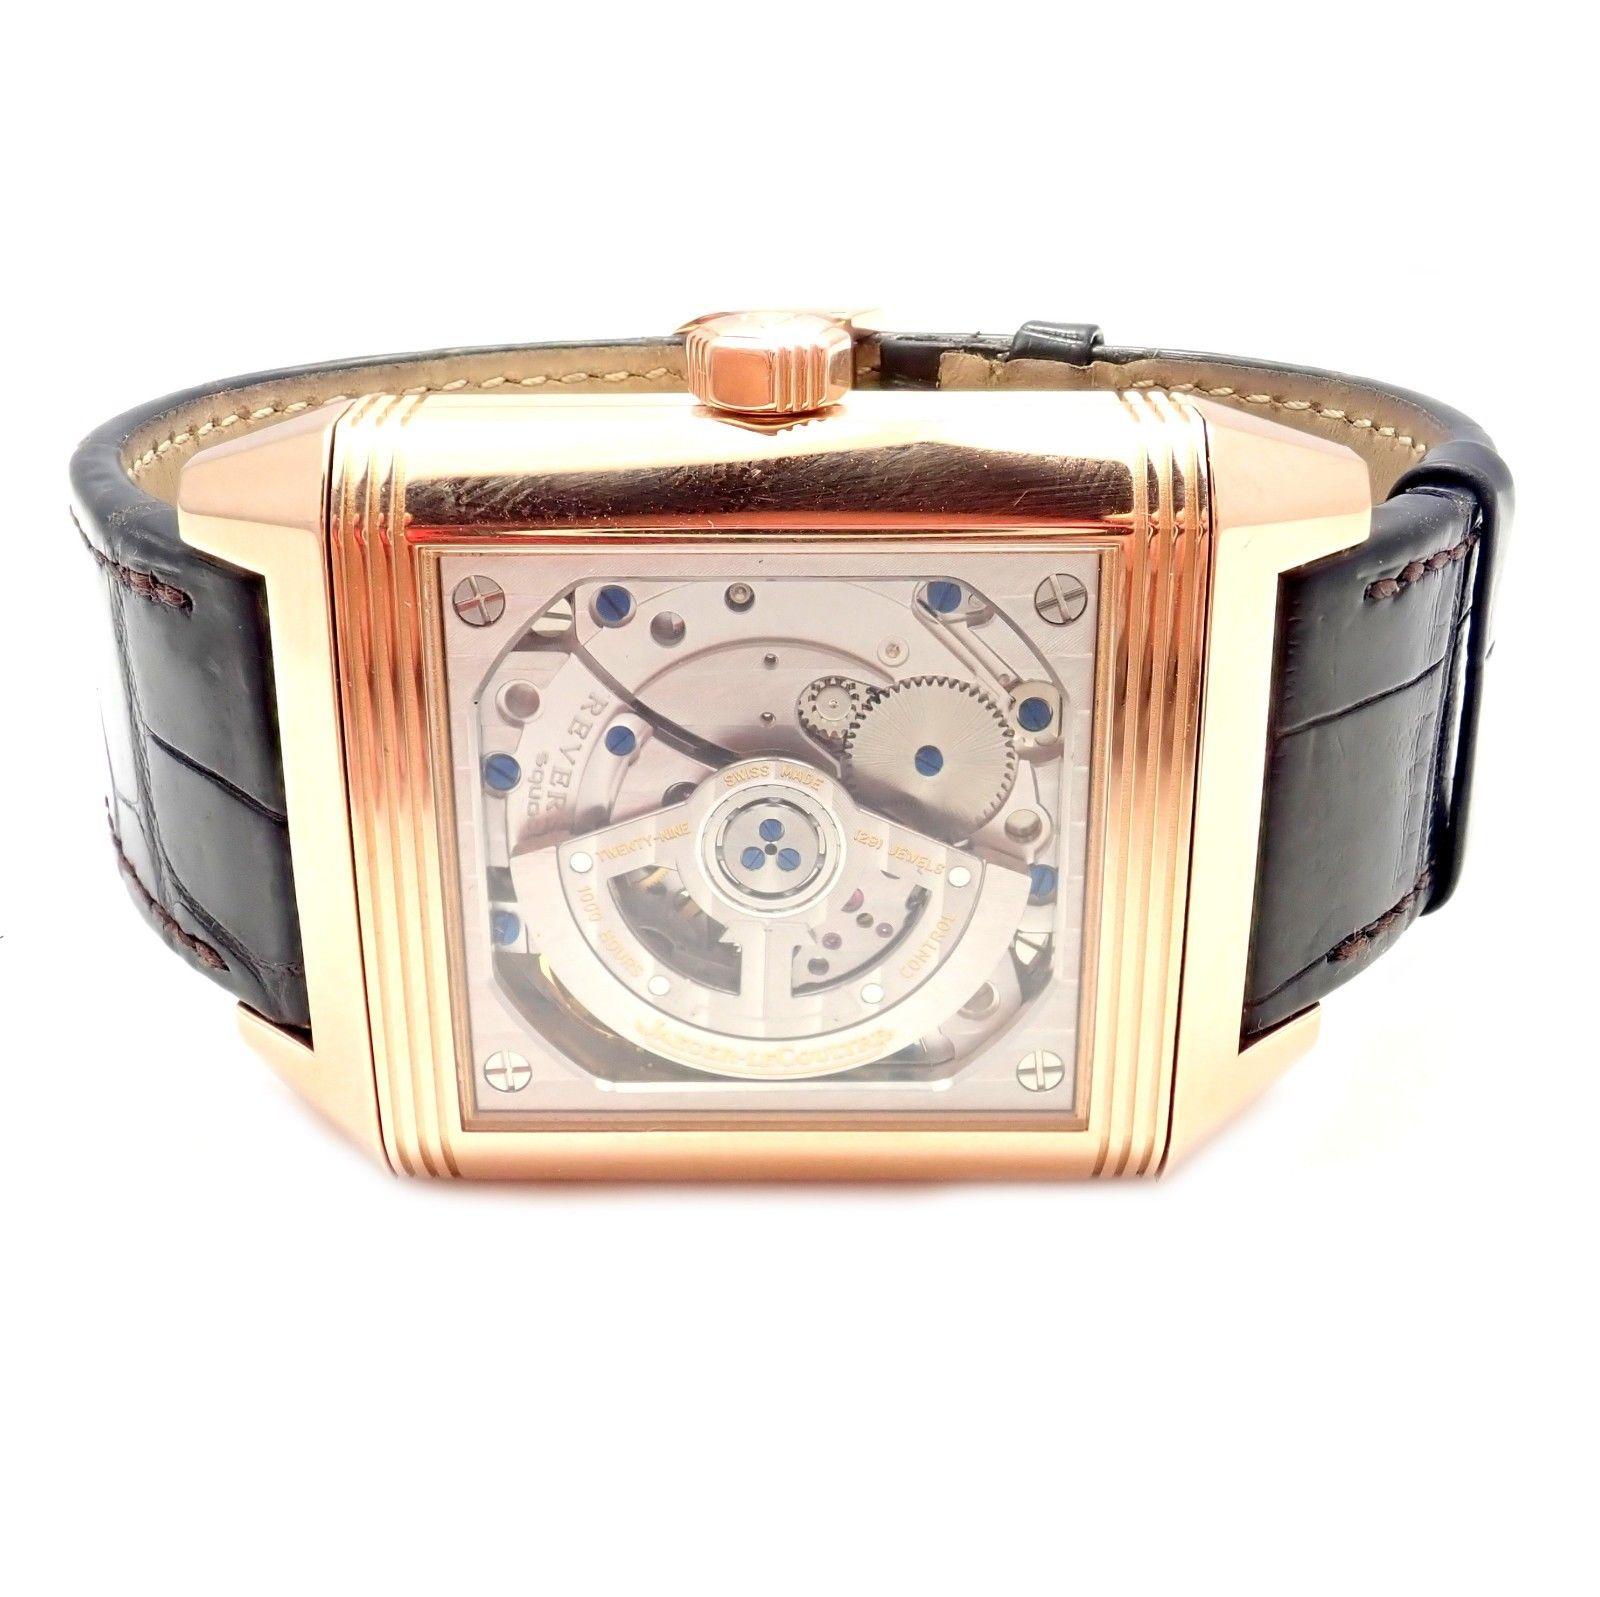 Jaeger-LeCoultre mens 18k yellow gold Squadra Reverso Hometime wristwatch, Ref. 230.2.77.
Details: 
Brand Name:	Jaeger LeCoultre  
Series:	Squadra Reverso
Case Material: 18k Rose Gold
Case is Reversible
Dial Color:	White
Length: 8